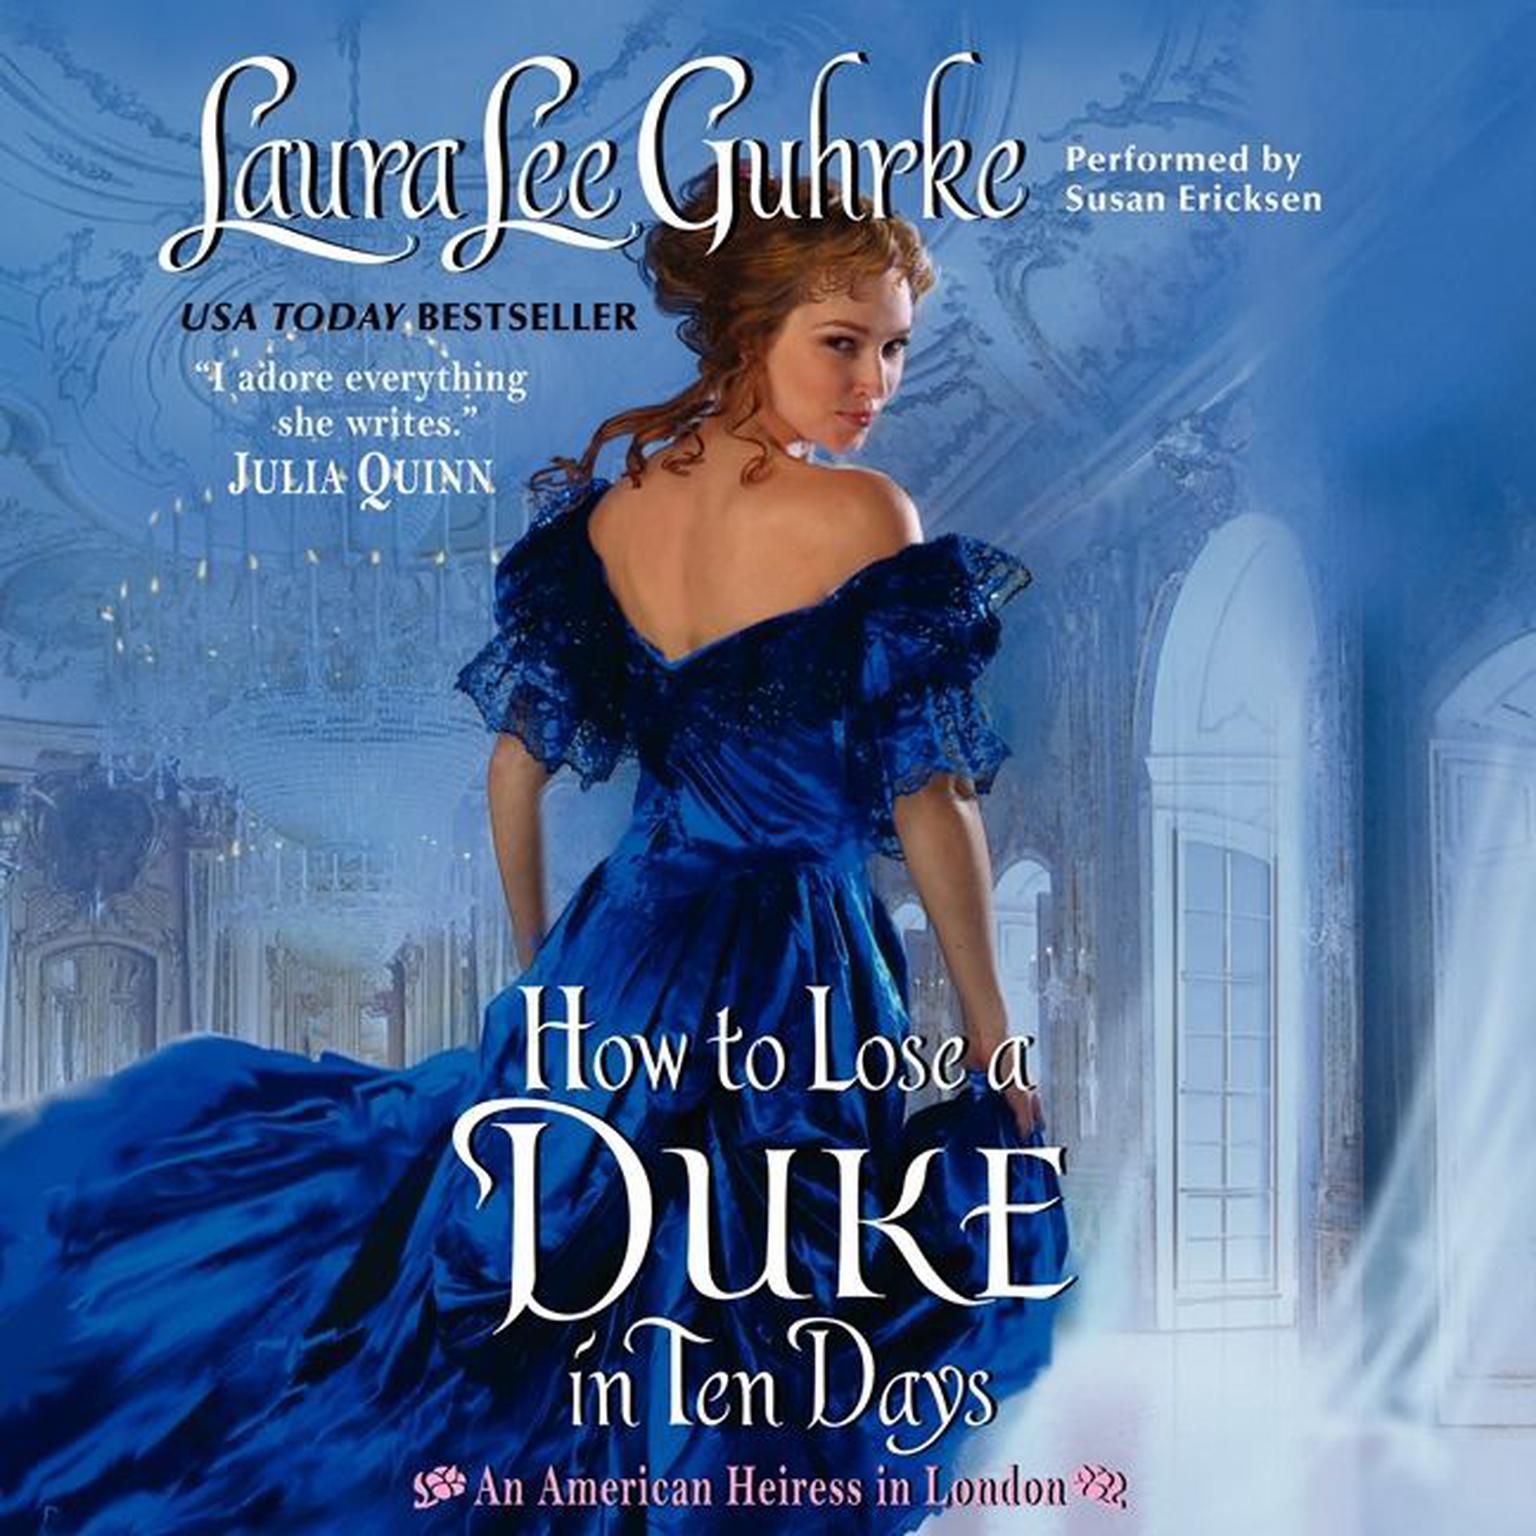 How to Lose a Duke in Ten Days: An American Heiress in London Audiobook, by Laura Lee Guhrke